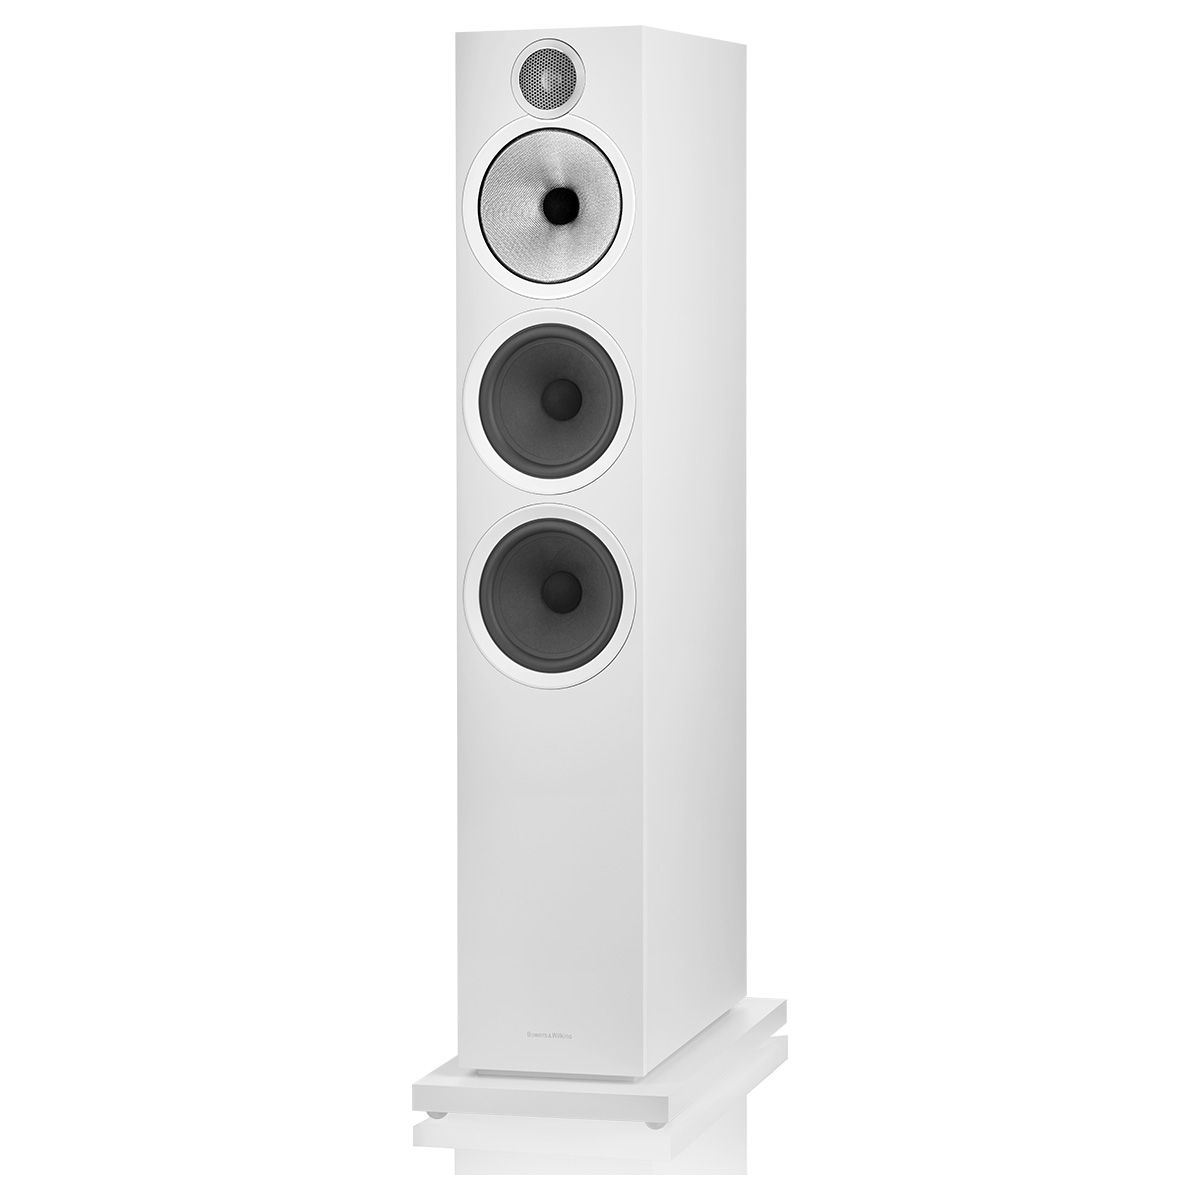 Bowers & Wilkins 603 S3 Floorstanding Speaker at an angle in White - without grille